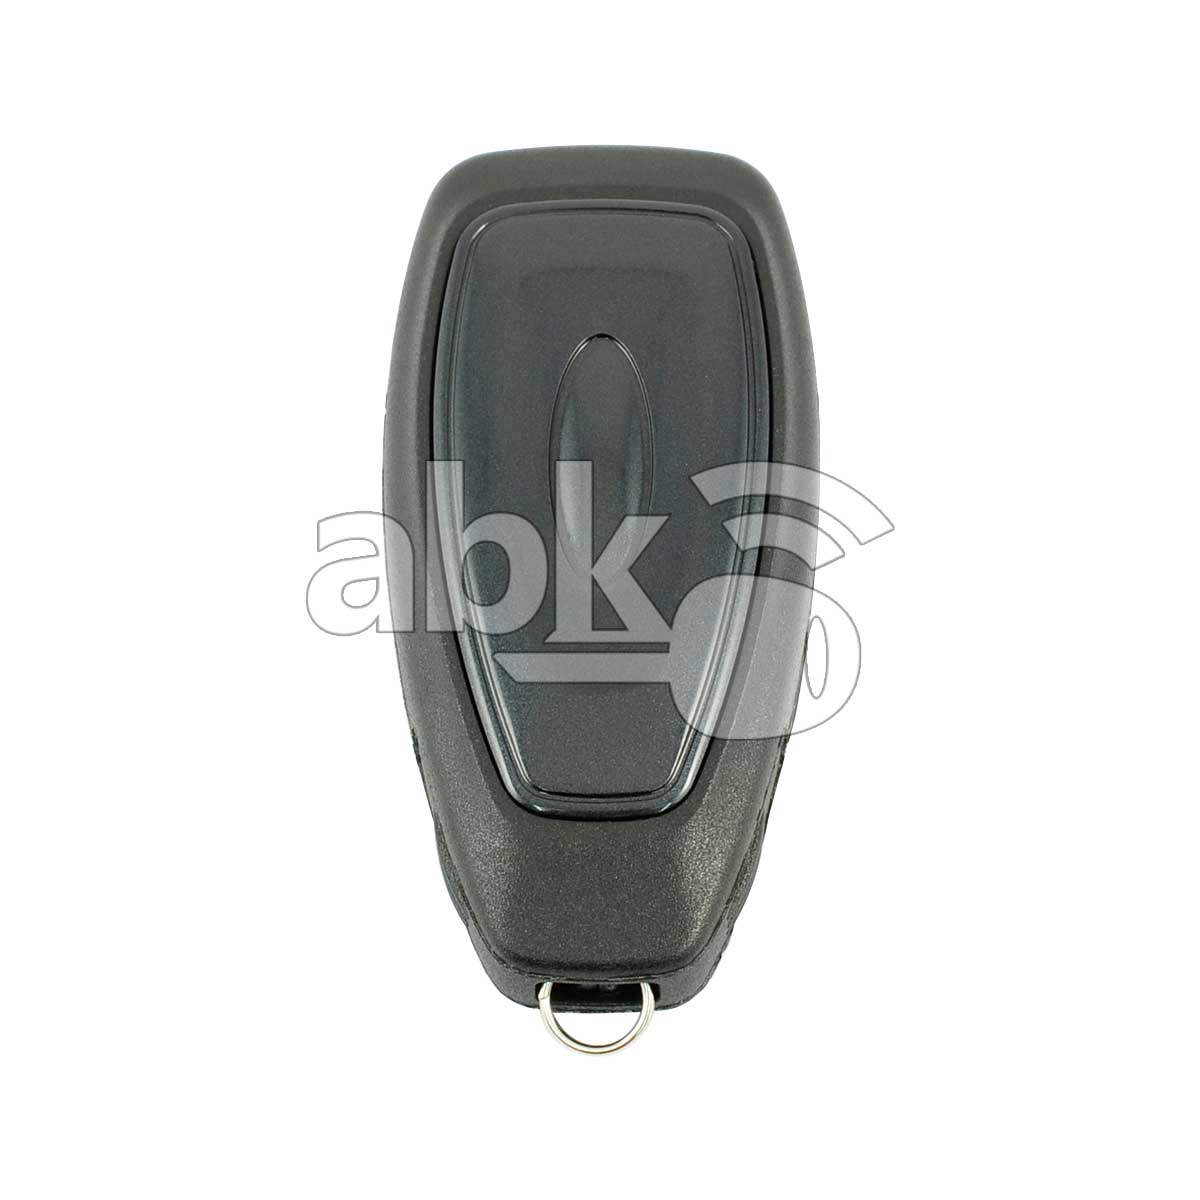 Ford Focus Fiesta C-Max Mondeo 2008+ Smart Key 3Buttons 1713499 1756409 433MHz KR55WK48801 -